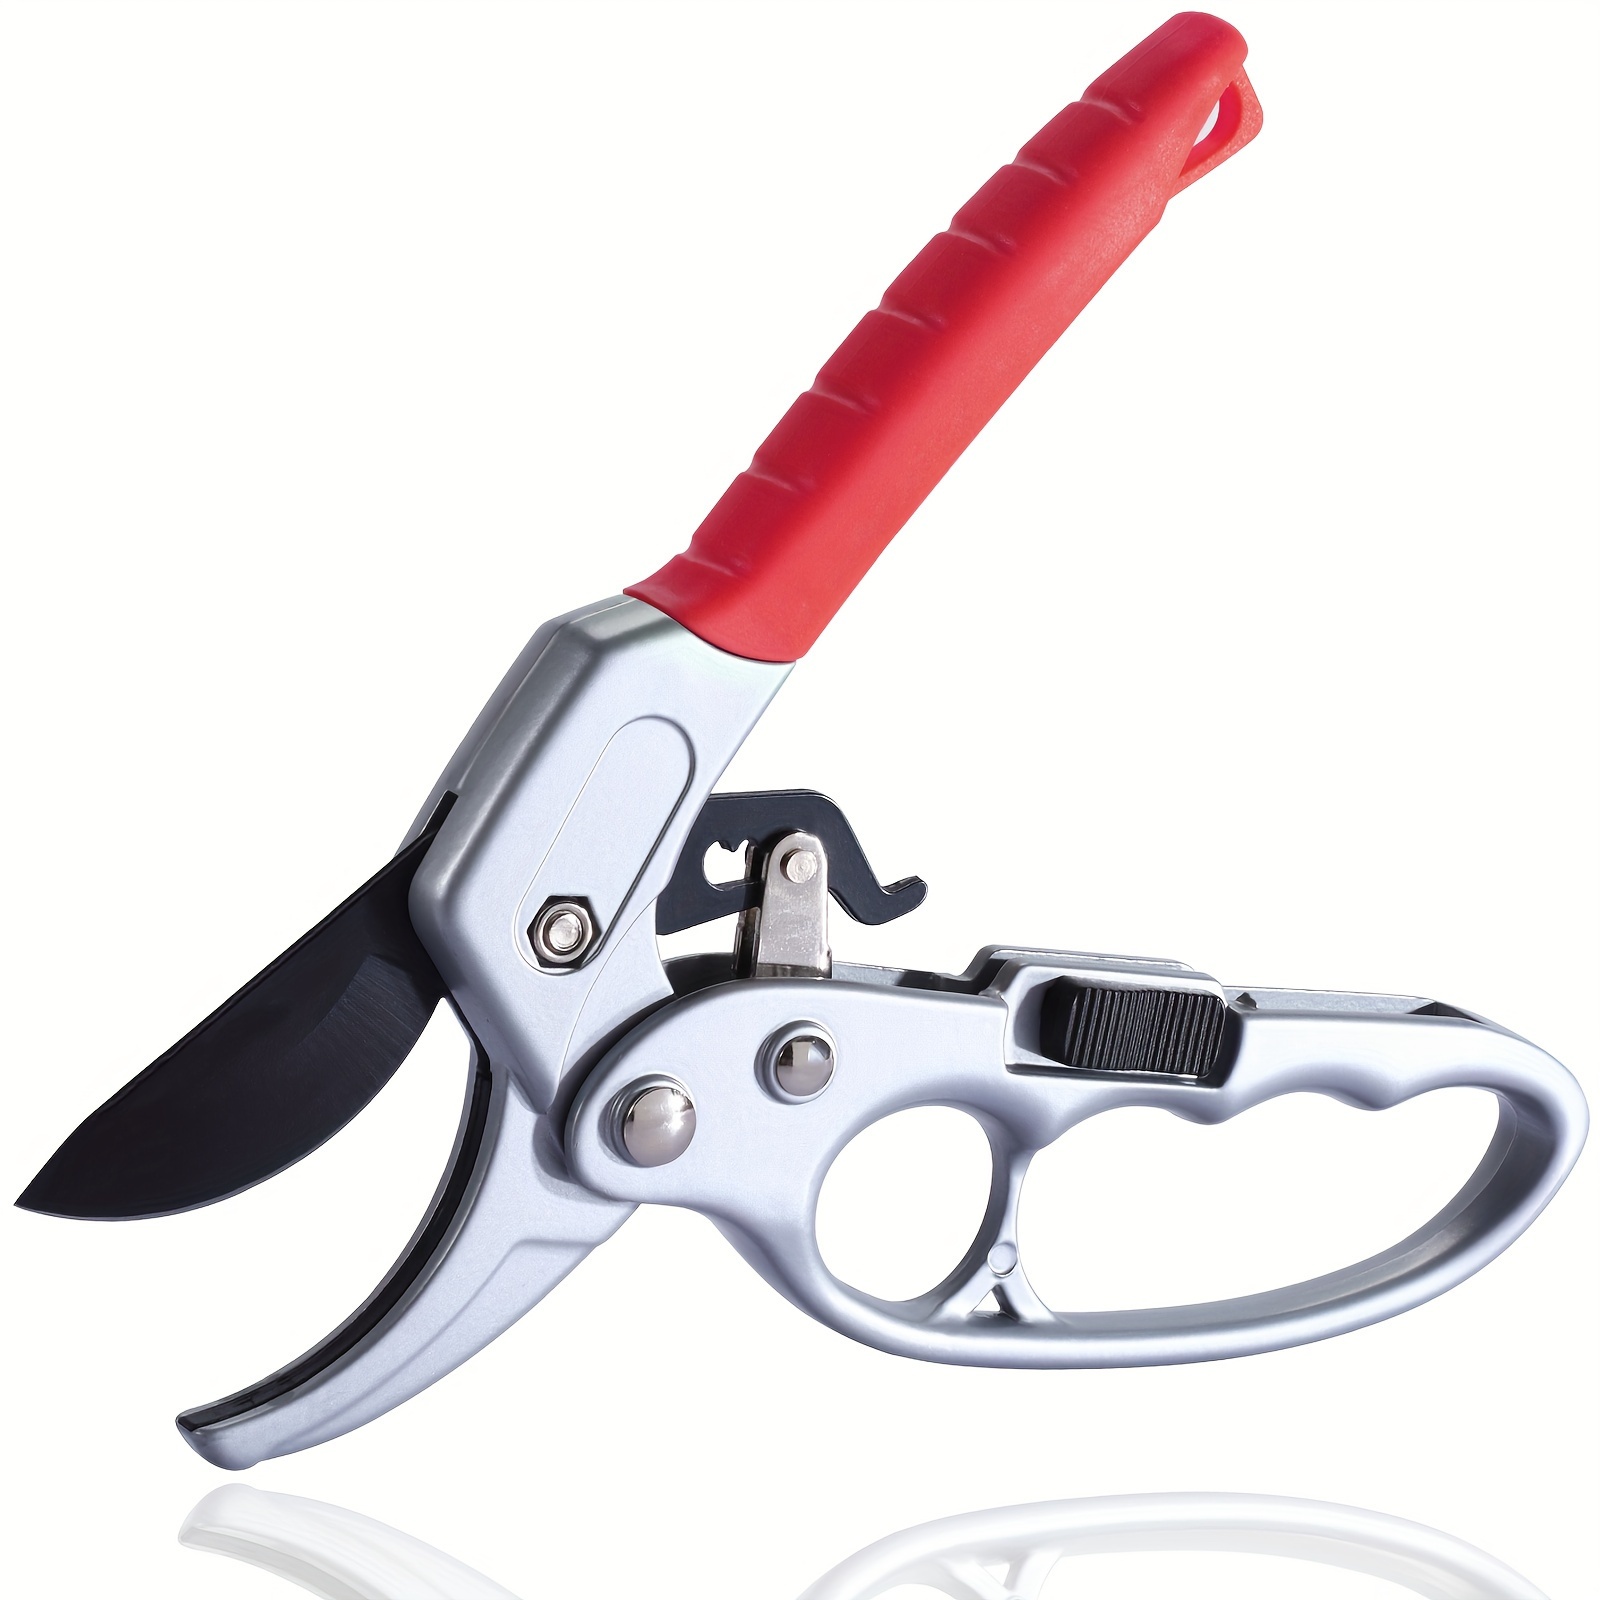 The best garden shears for trimming shrubs and bushes - Gardens Illustrated